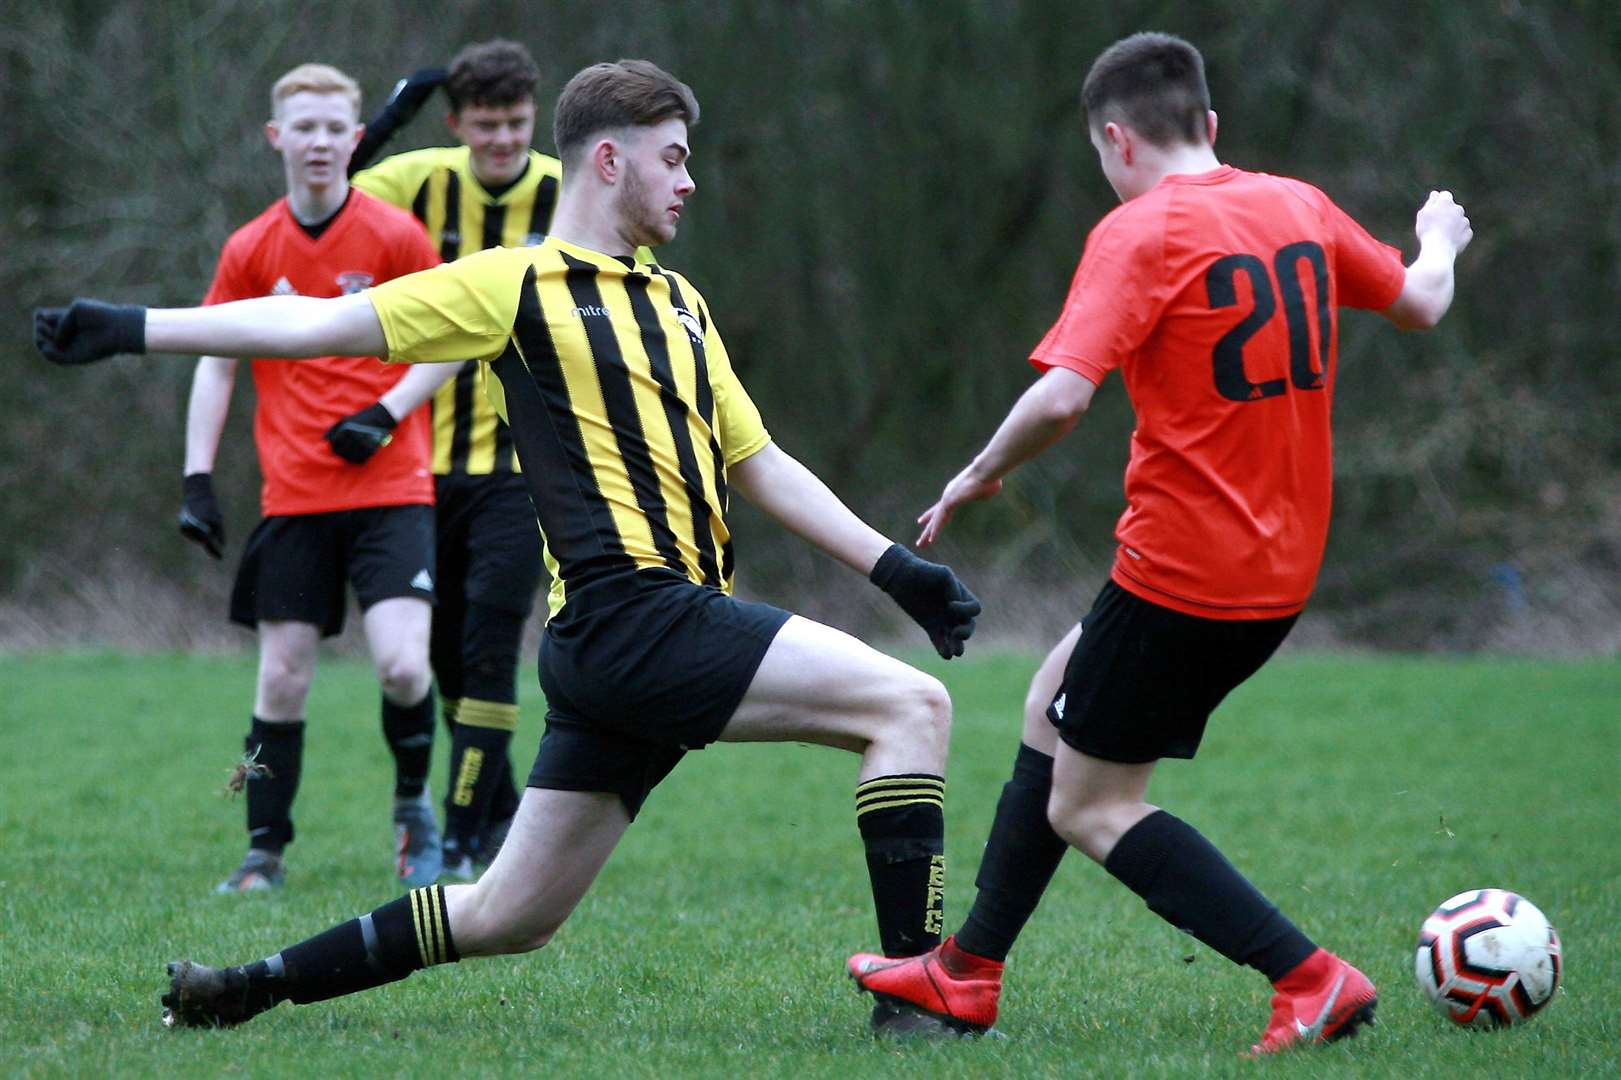 Rainham Eagles under-18s (stripes) put their foot in against Lordswood Youth Tigers under-18s. Picture: Phil Lee FM29961651